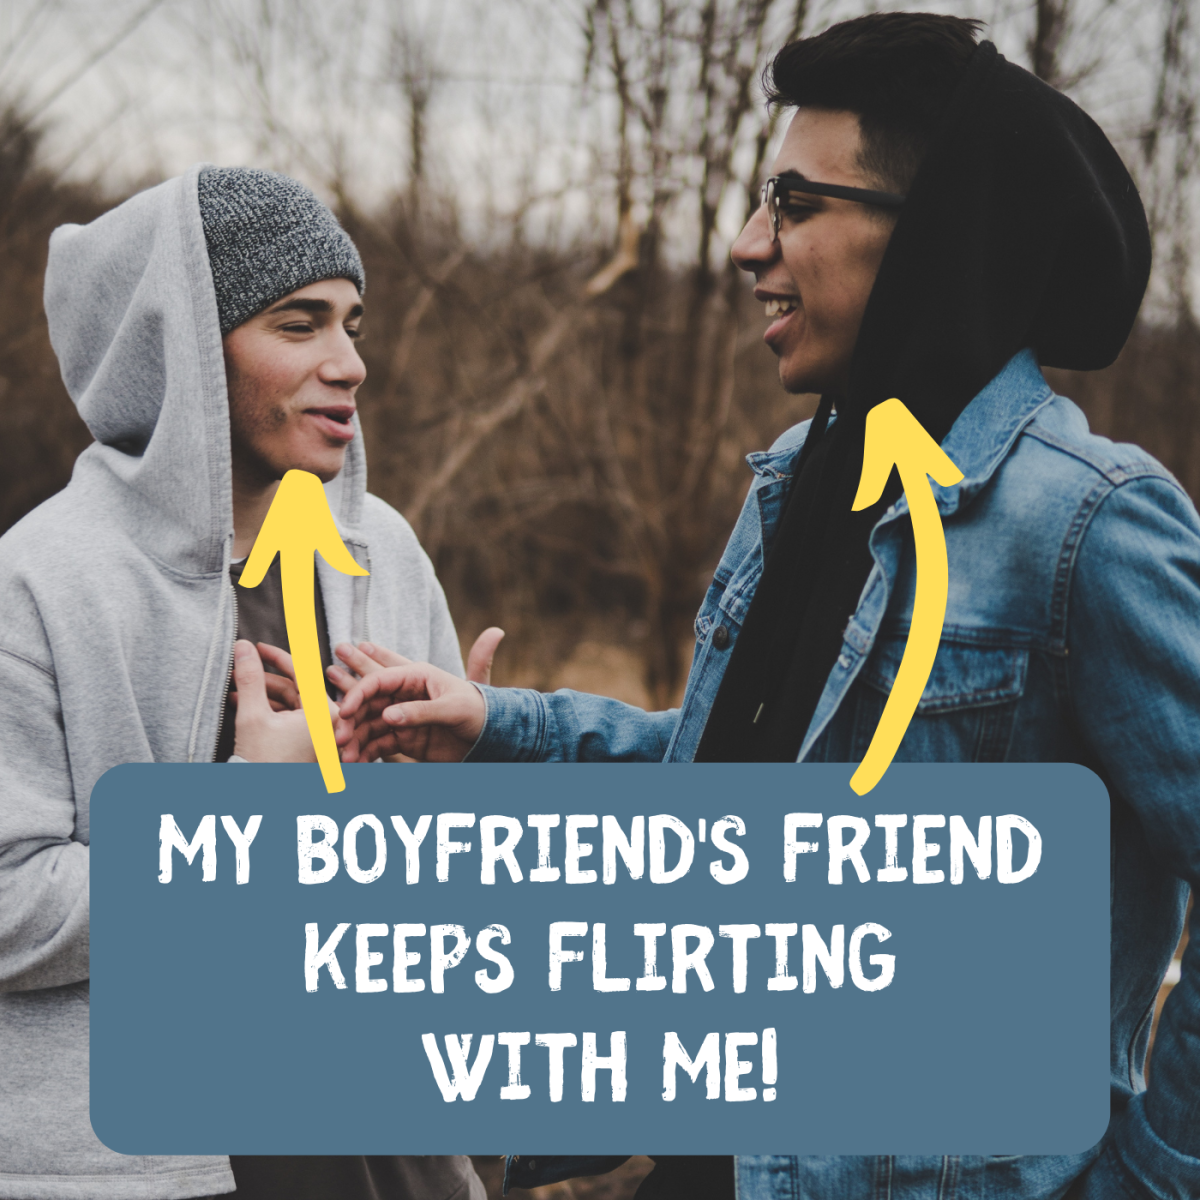 What to Do When Your Boyfriend's Friend Starts Flirting With You